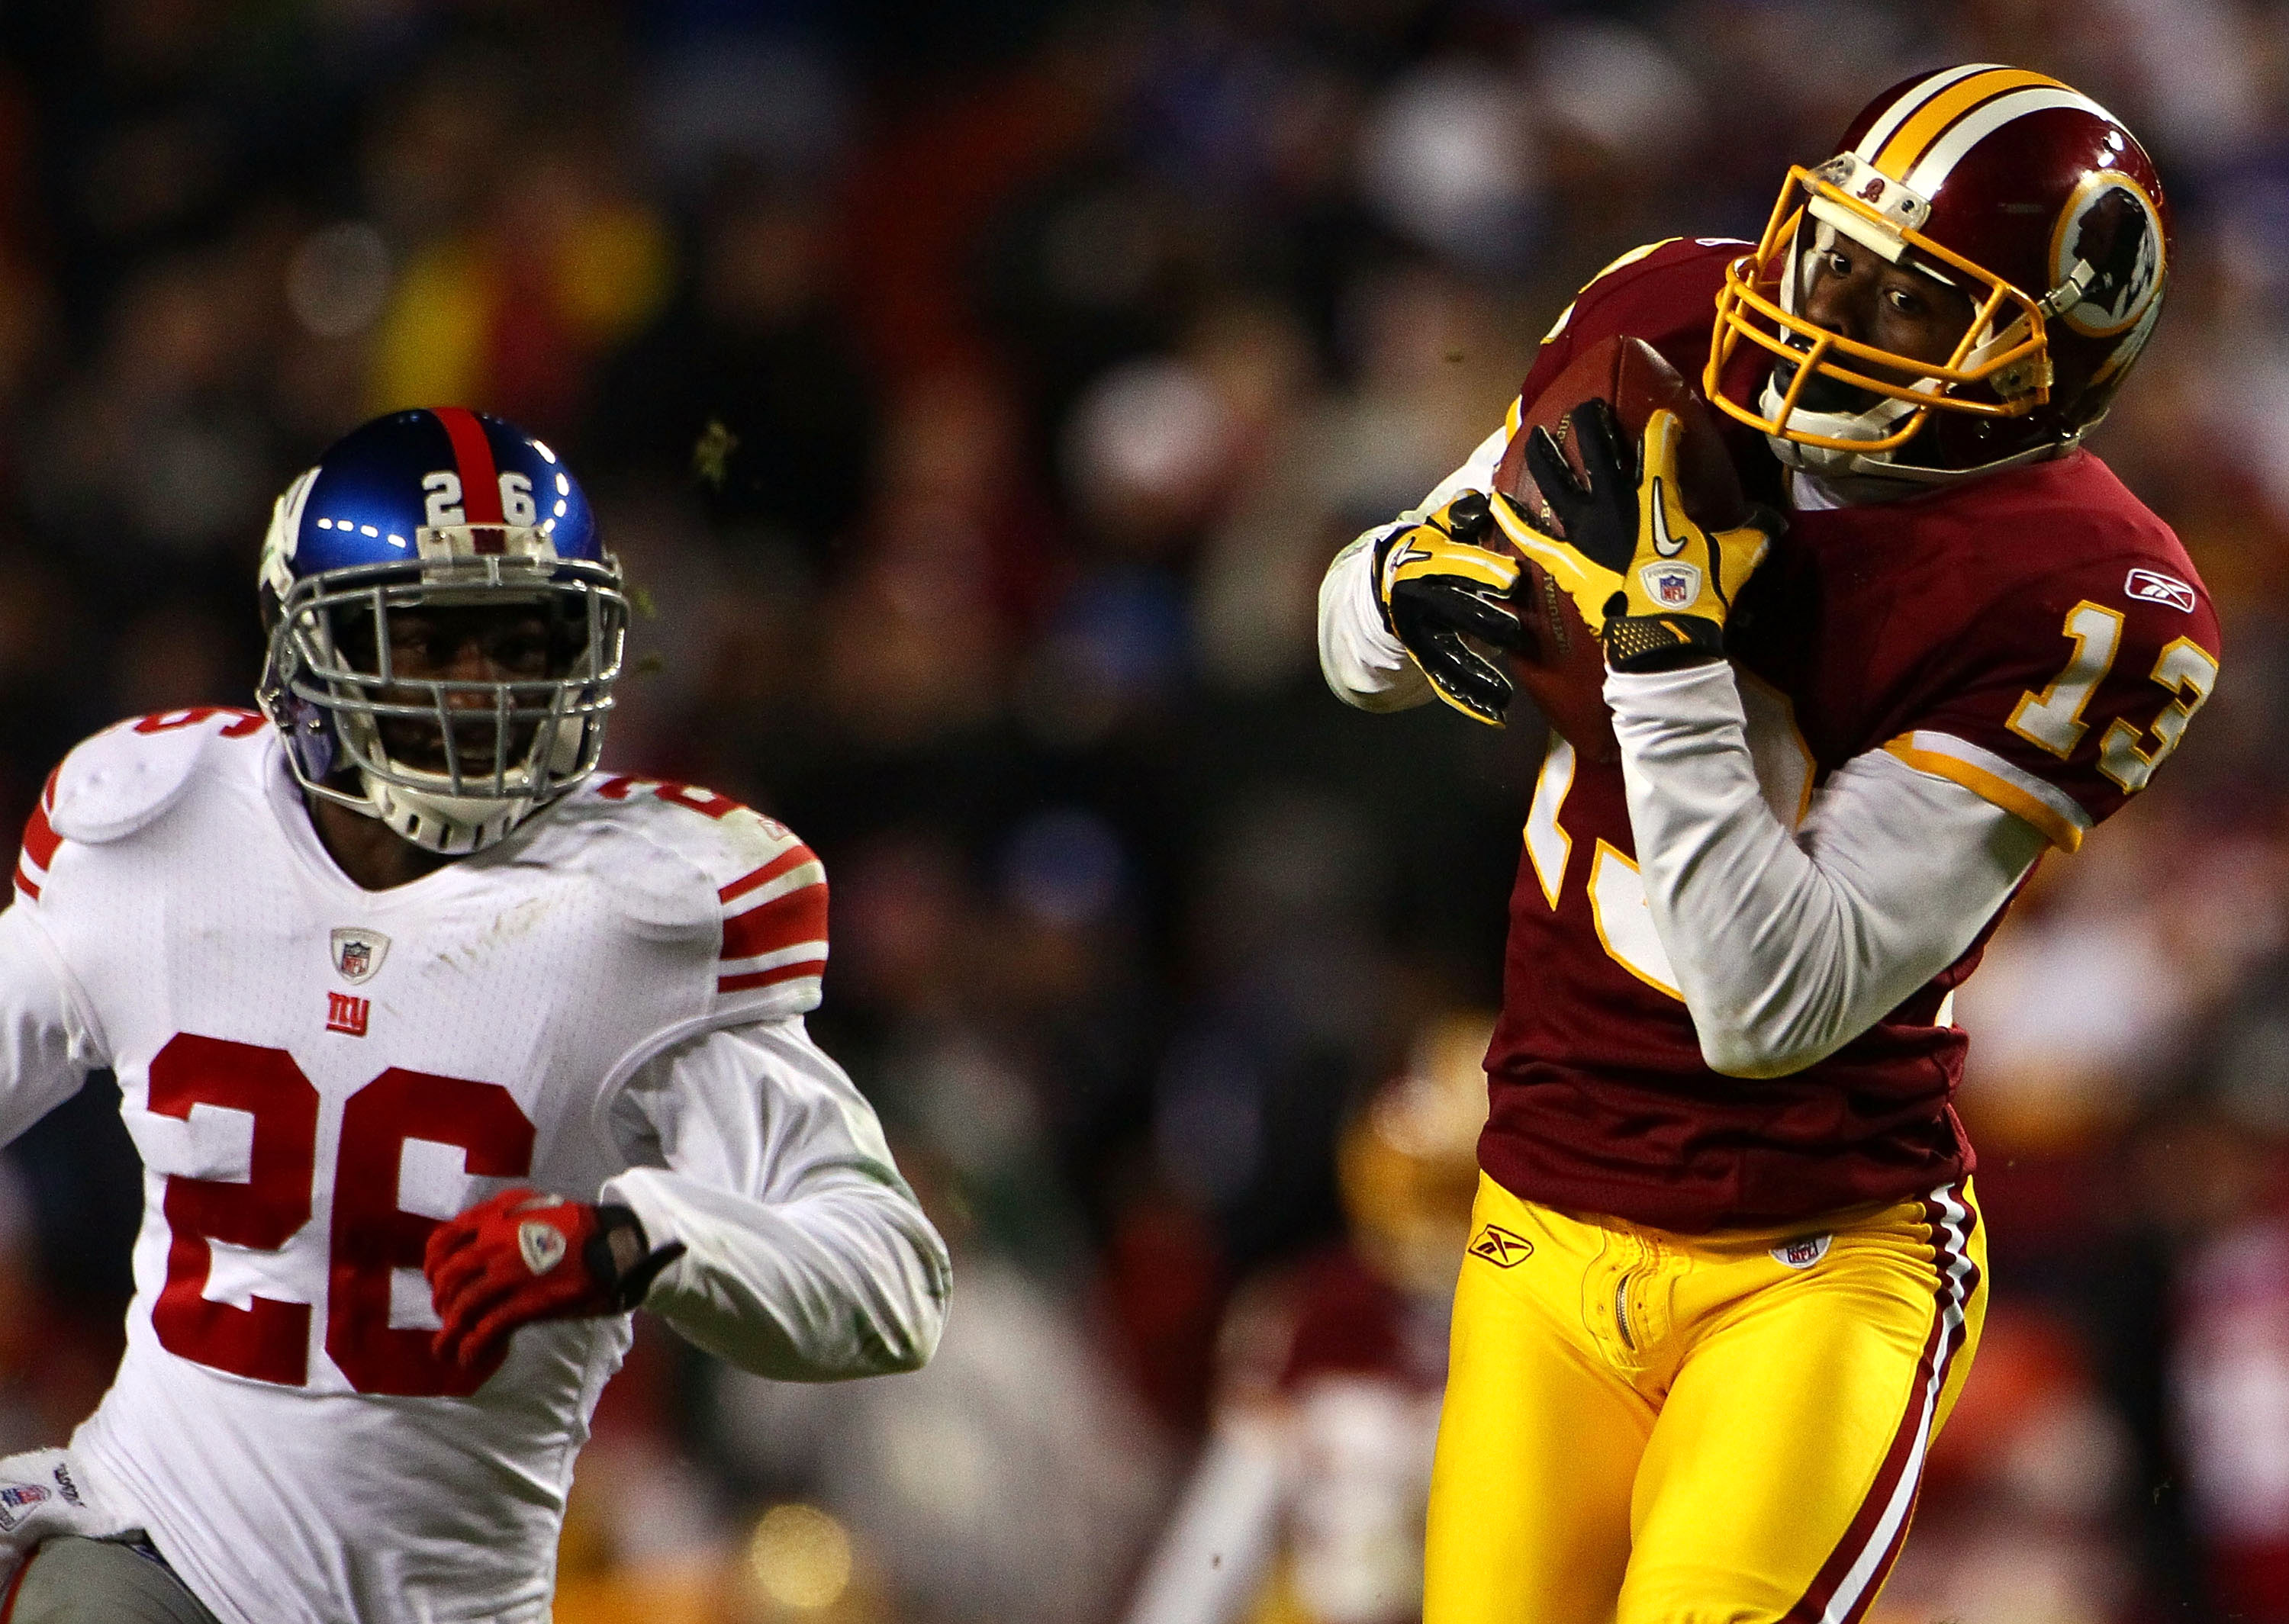 LANDOVER, MD - JANUARY 02:  Wide receiver Anthony Armstrong #13 of the Washington Redskins catches a touchdown pass over Antrel Rolle #26 of the New York Giants during the game at FedEx Field on January 2, 2011 in Landover, Maryland. The Giants won the ga